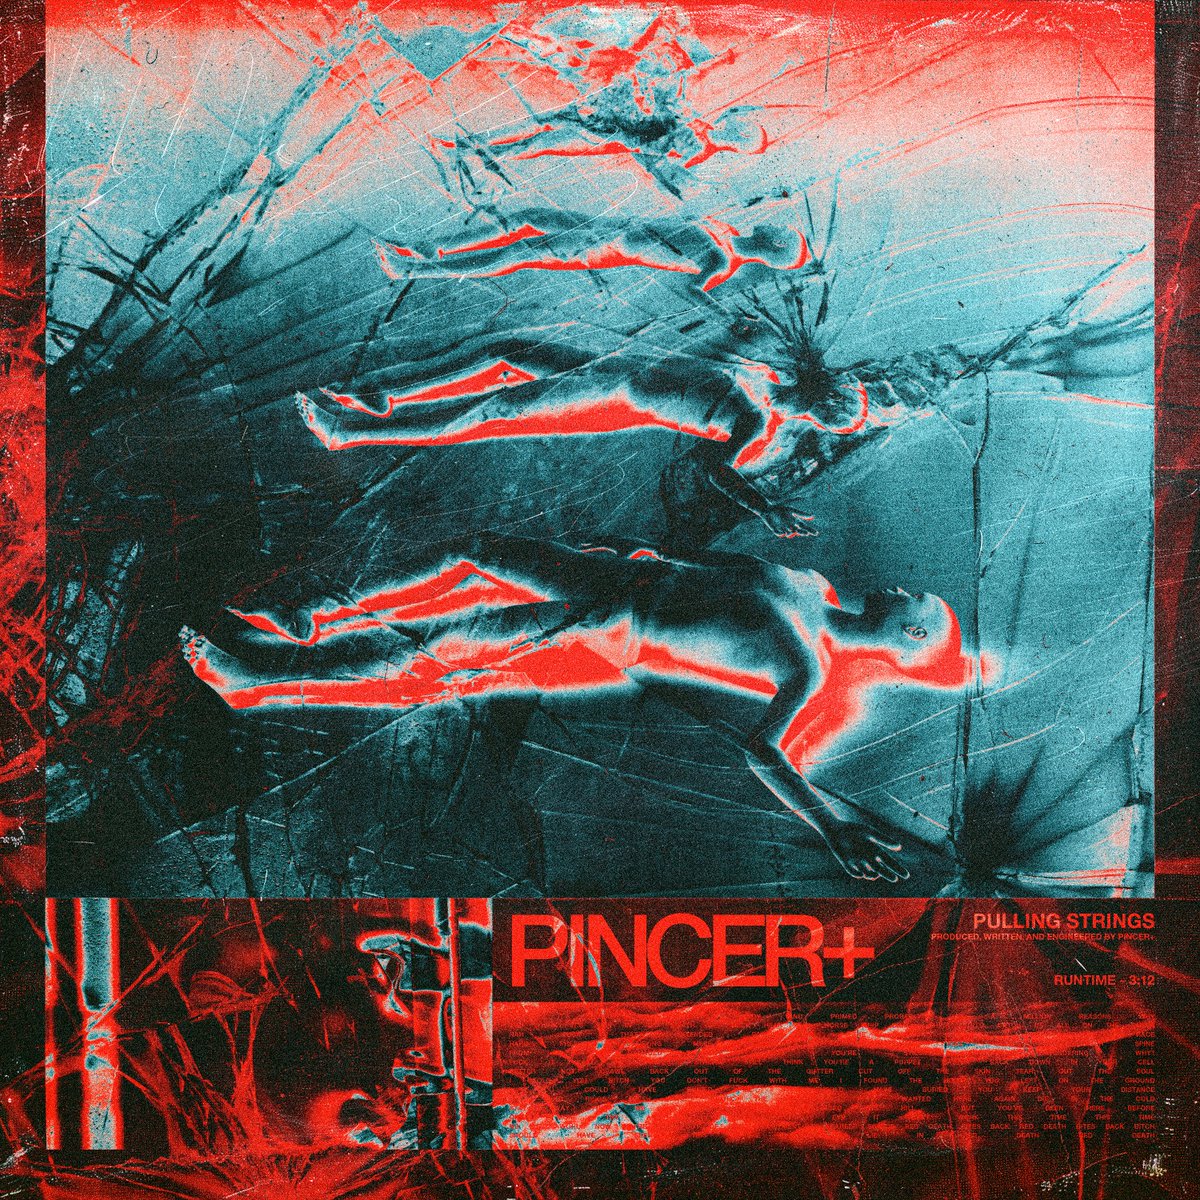 That new @pincerplus go dumb 🥵Cooked this up while listening to the new track.

Available for license!

Text and logos for placement.

Can be customized to fit your needs!

#graphicdesign #graphicart #digitalart #metalcore #hardcore #albumartforsale #albumart #metal #beatdown